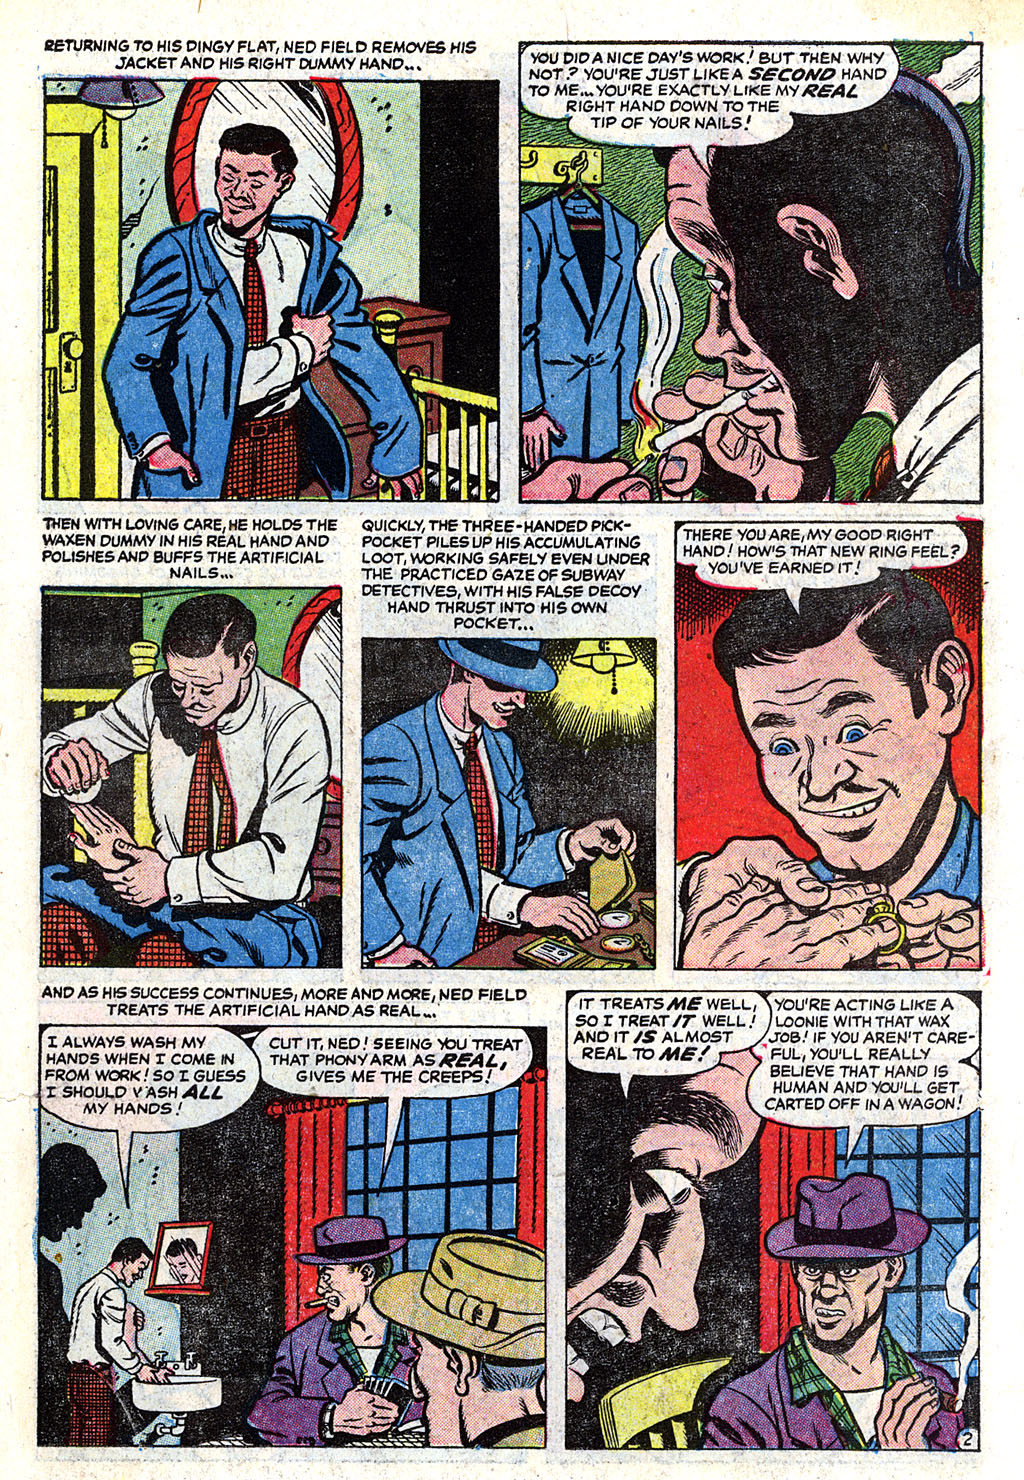 Marvel Tales (1949) 131 Page 10